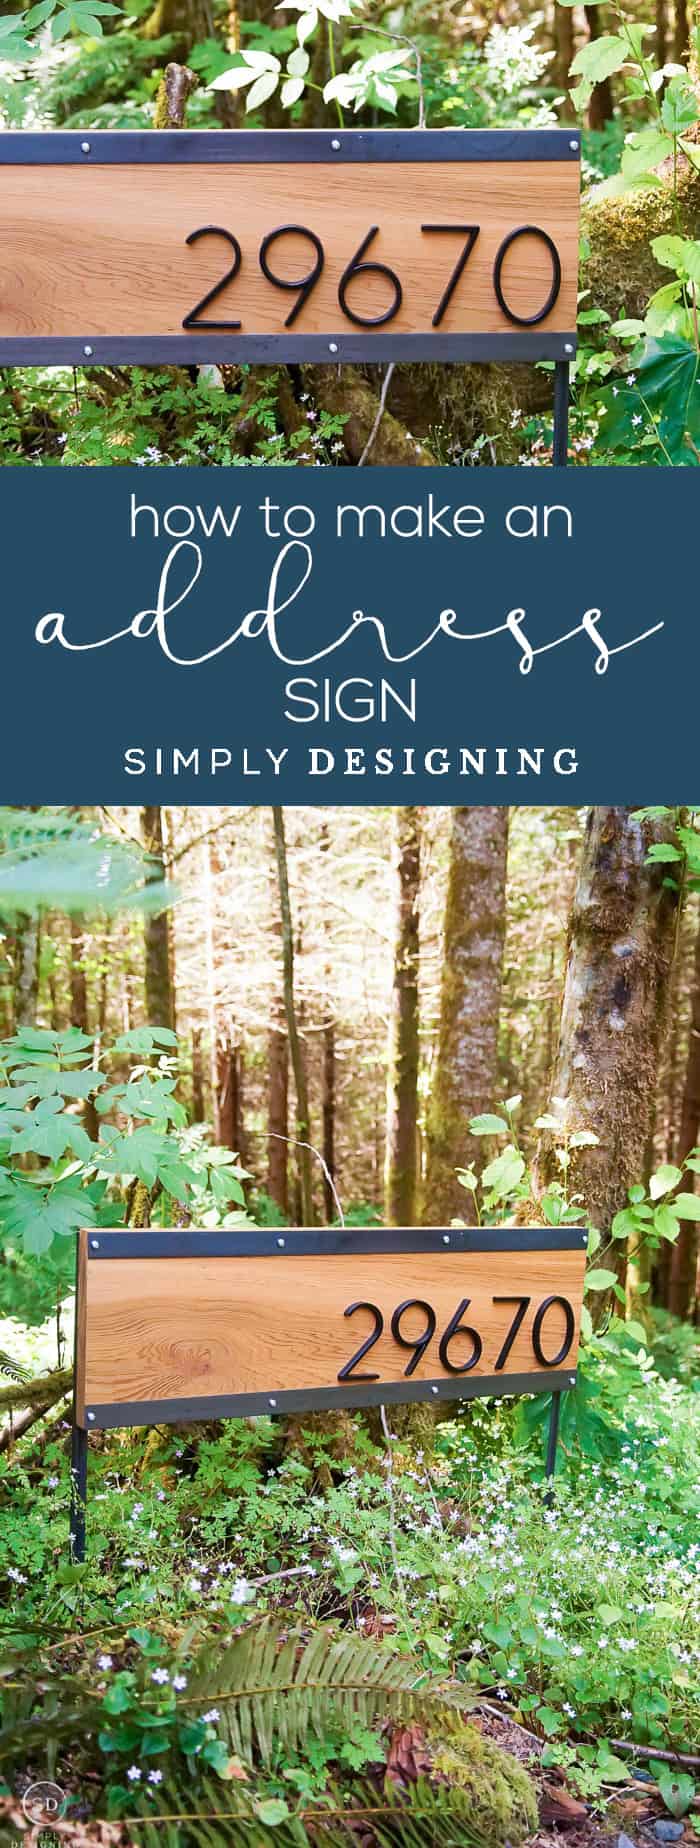 Learn how to make an address sign that is beautiful and modern in only a few easy steps so that you can create a unique lasting first impression